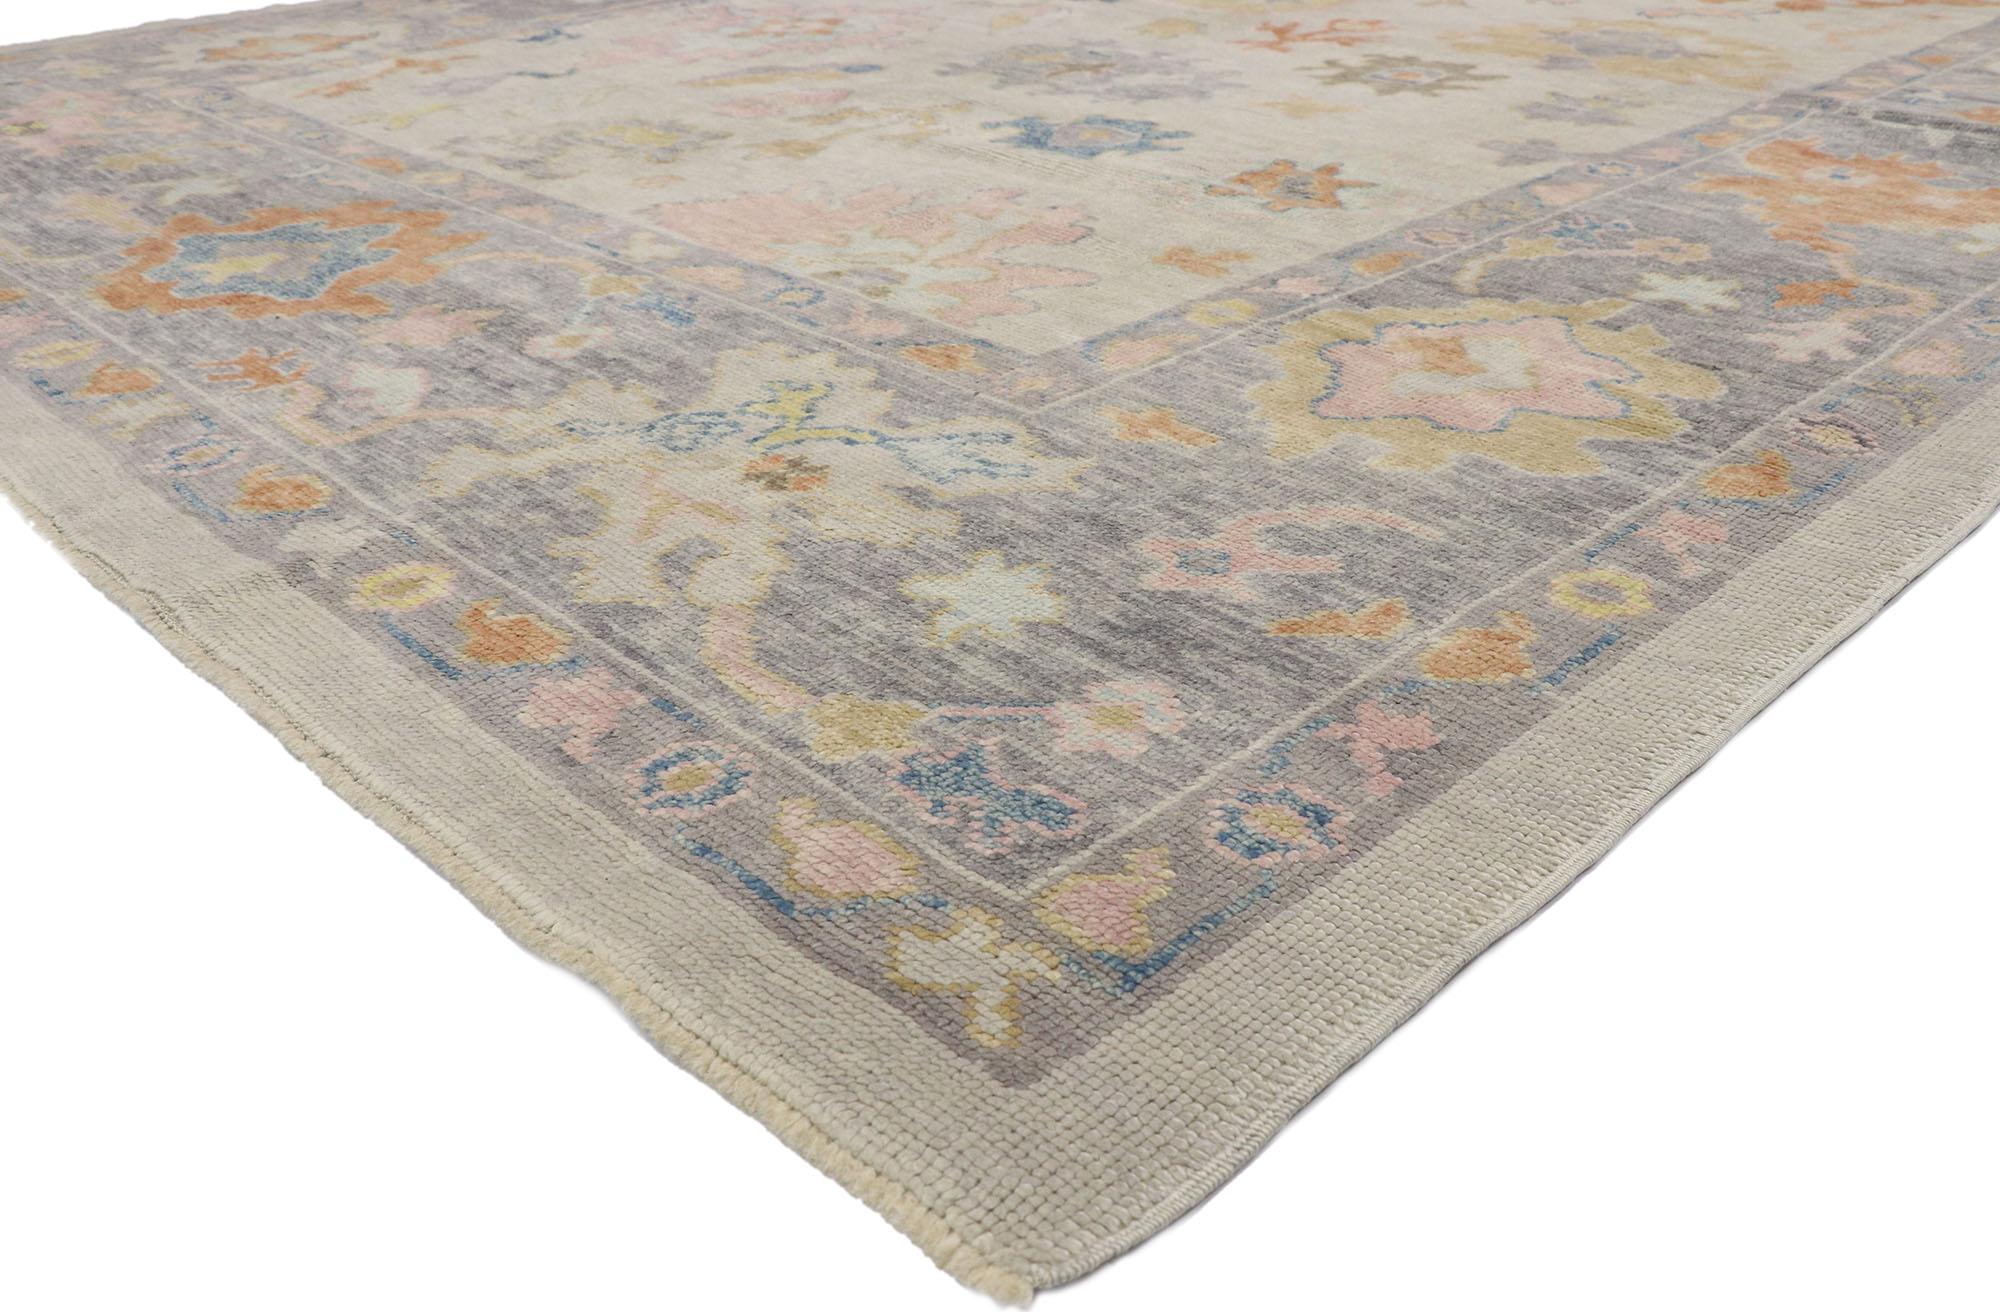 52736, new contemporary Oushak design transitional area rug, vintage inspired rug 08'09 x 11'06. The large-scale geometric print and subtle pops of color woven into this hand knotted wool contemporary Oushak transitional area rug work together